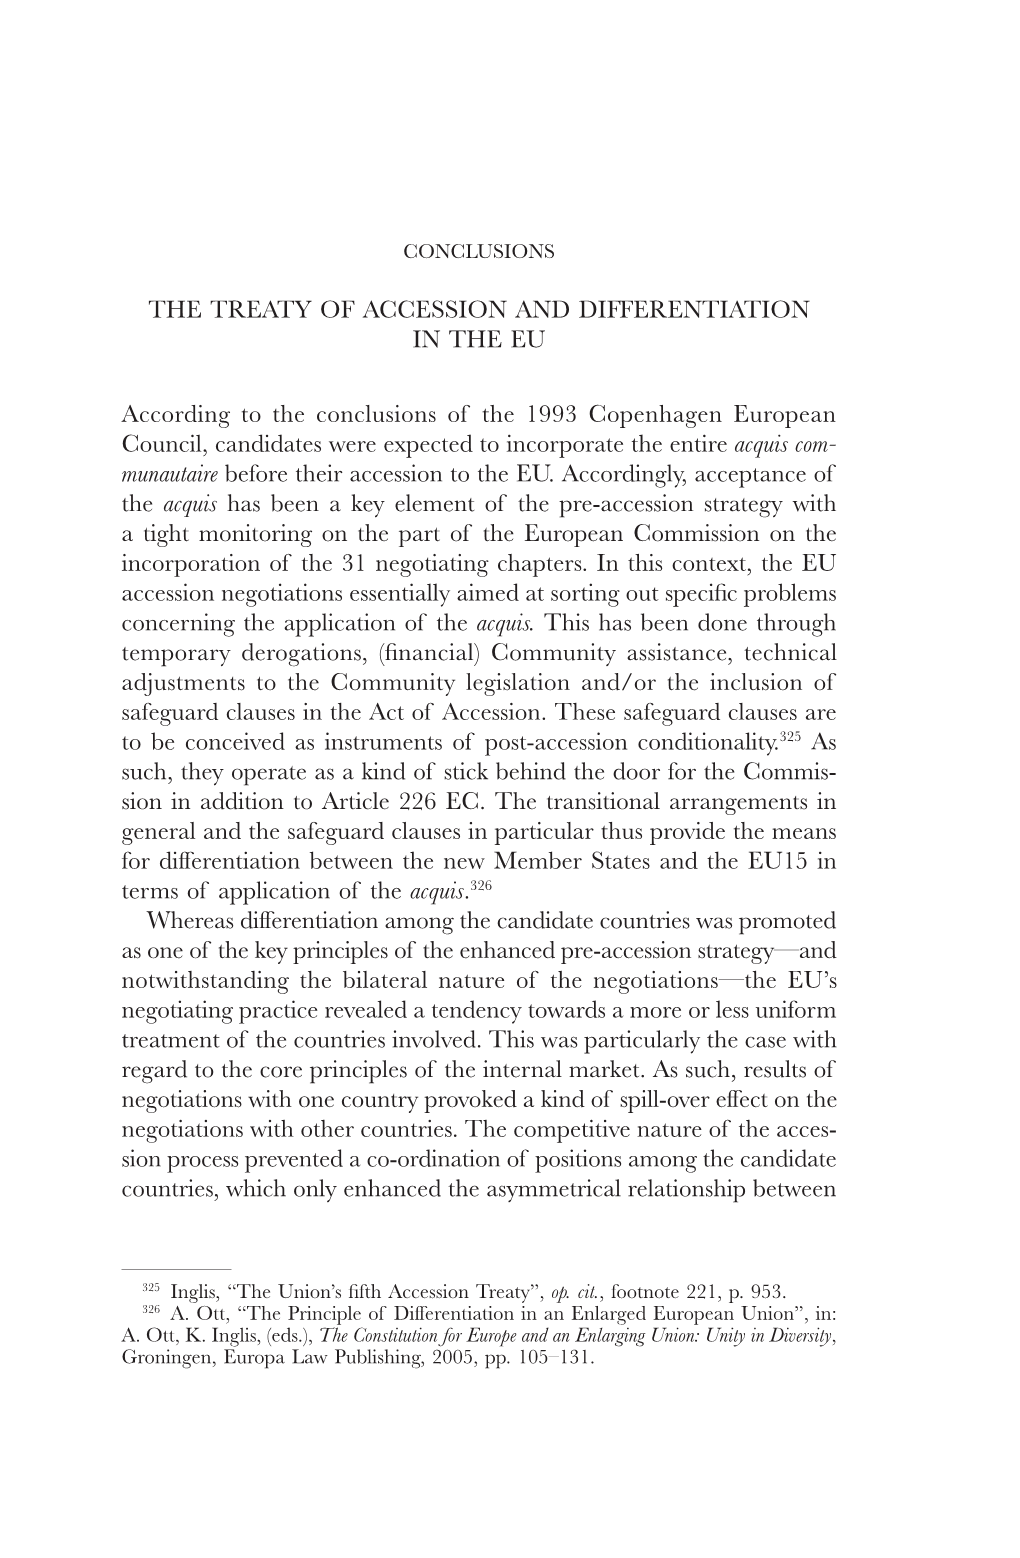 The Treaty of Accession and Differentiation in the Eu